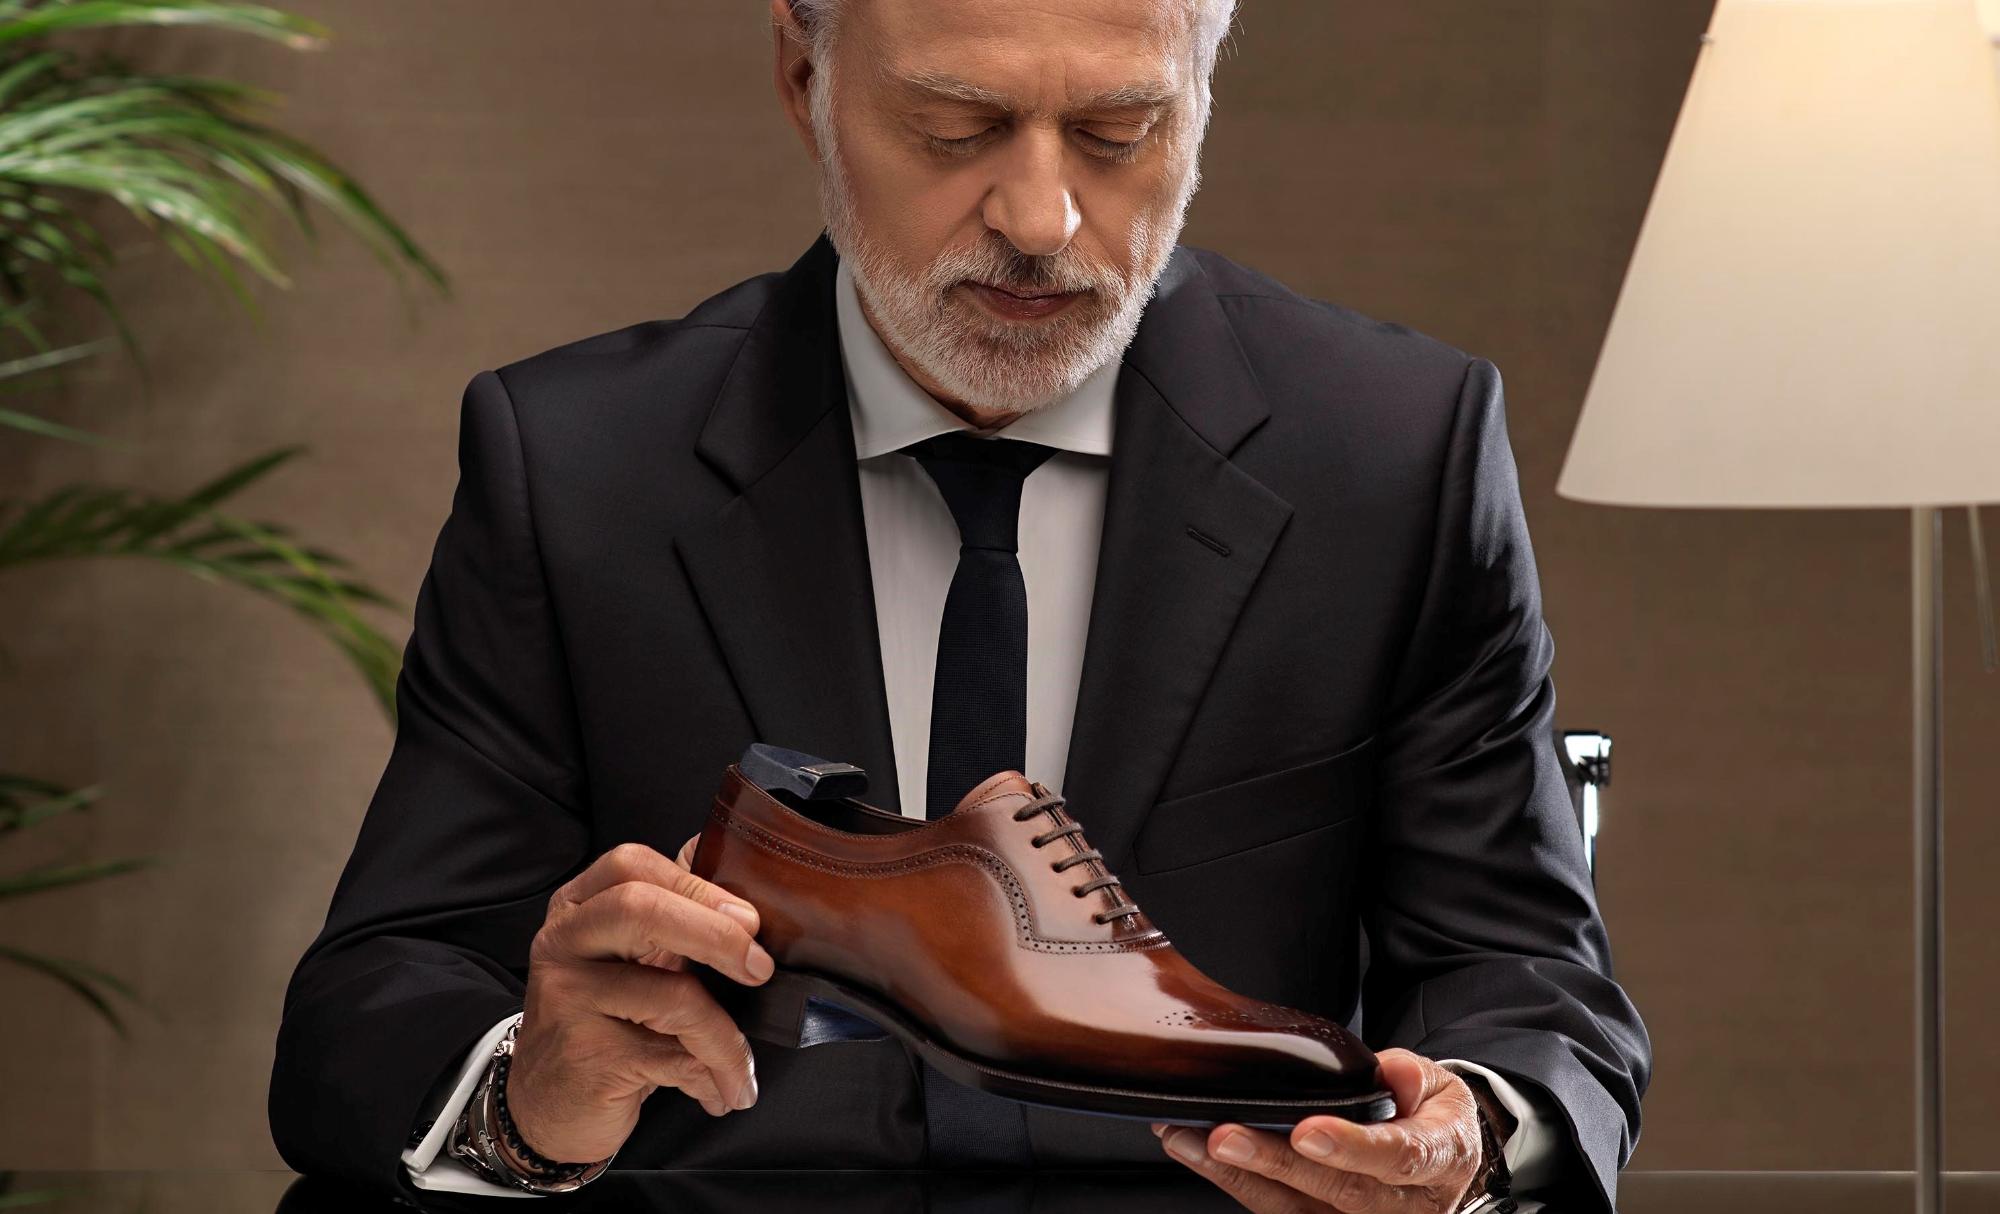 Luxury shoes for men